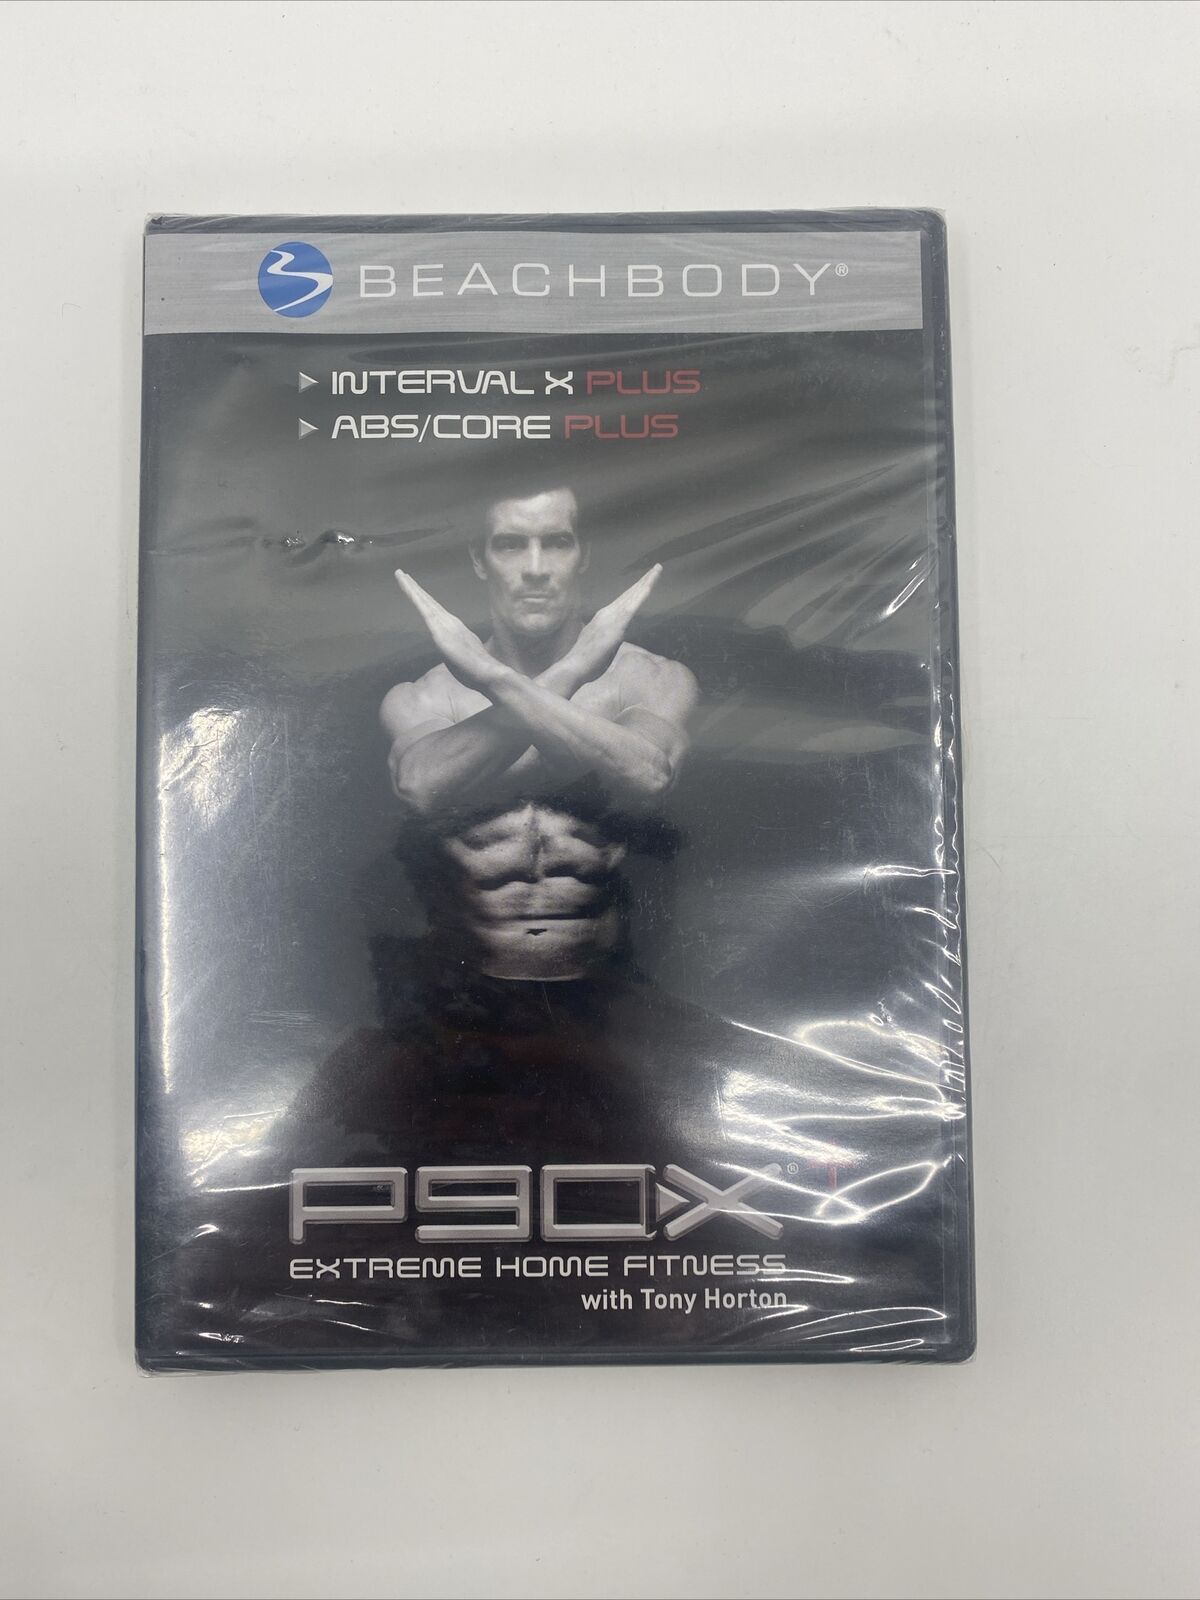 P90X - Interval X Plus - Abs/Core Plus - DVD Extreme Home Fitness by Beachbody 